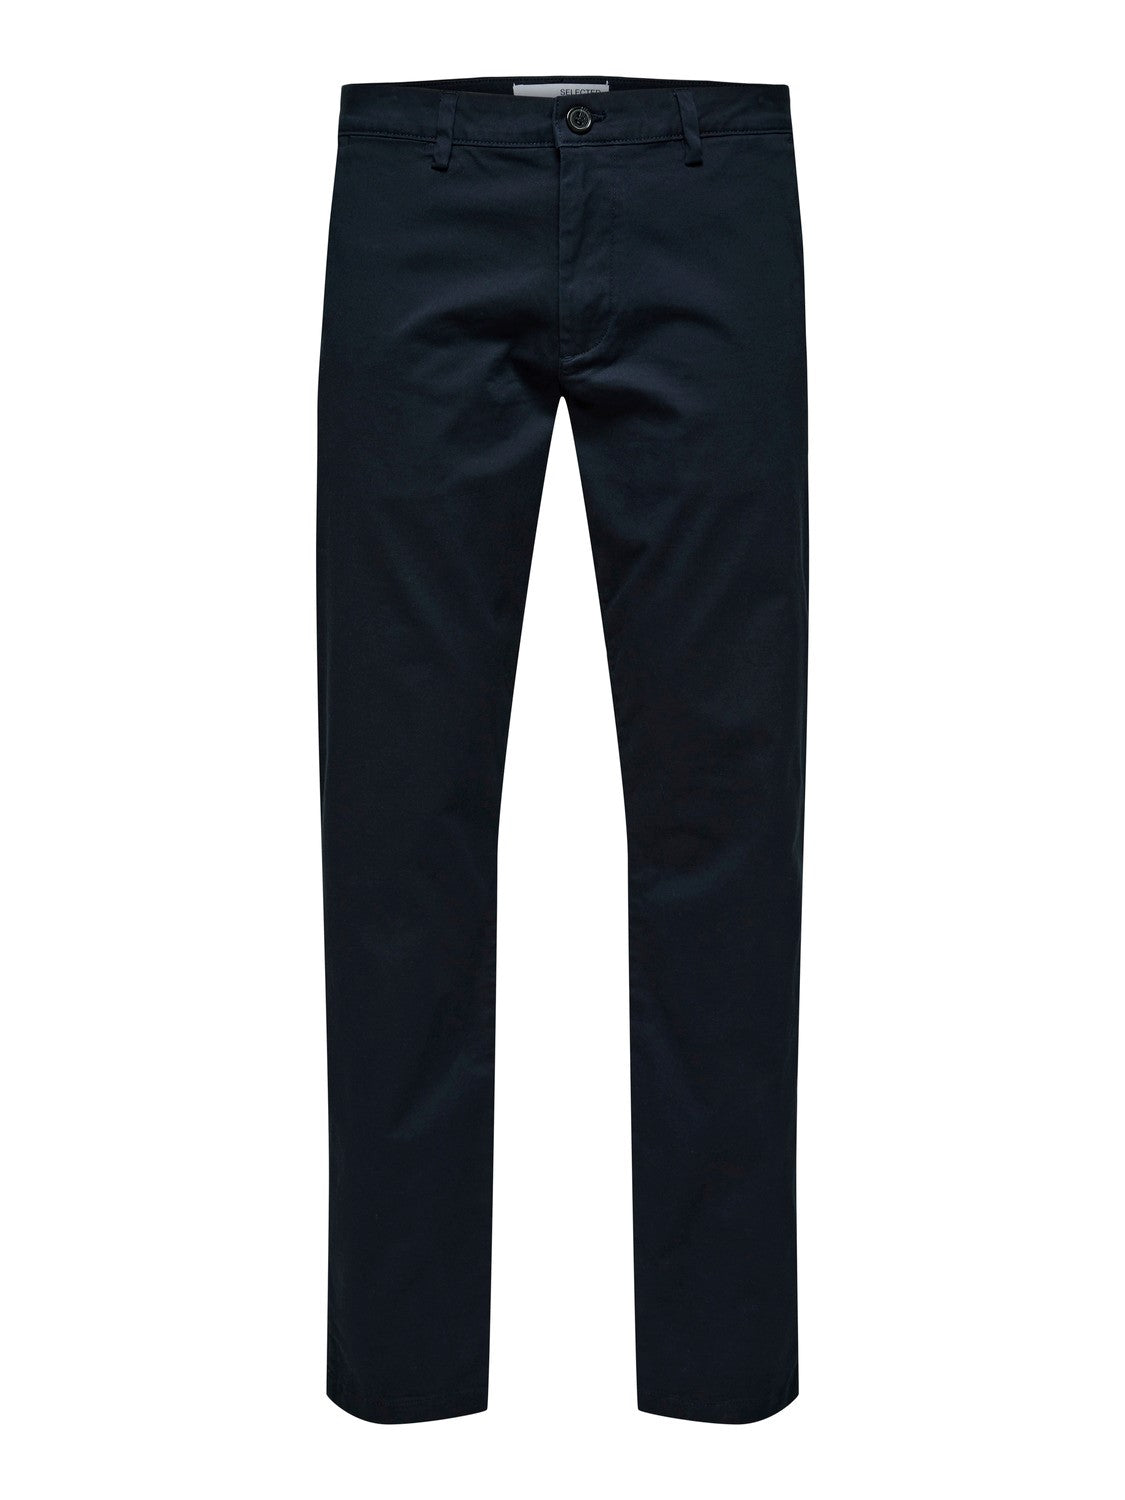 SELECTED Navy Slim Fit Flex Chinos